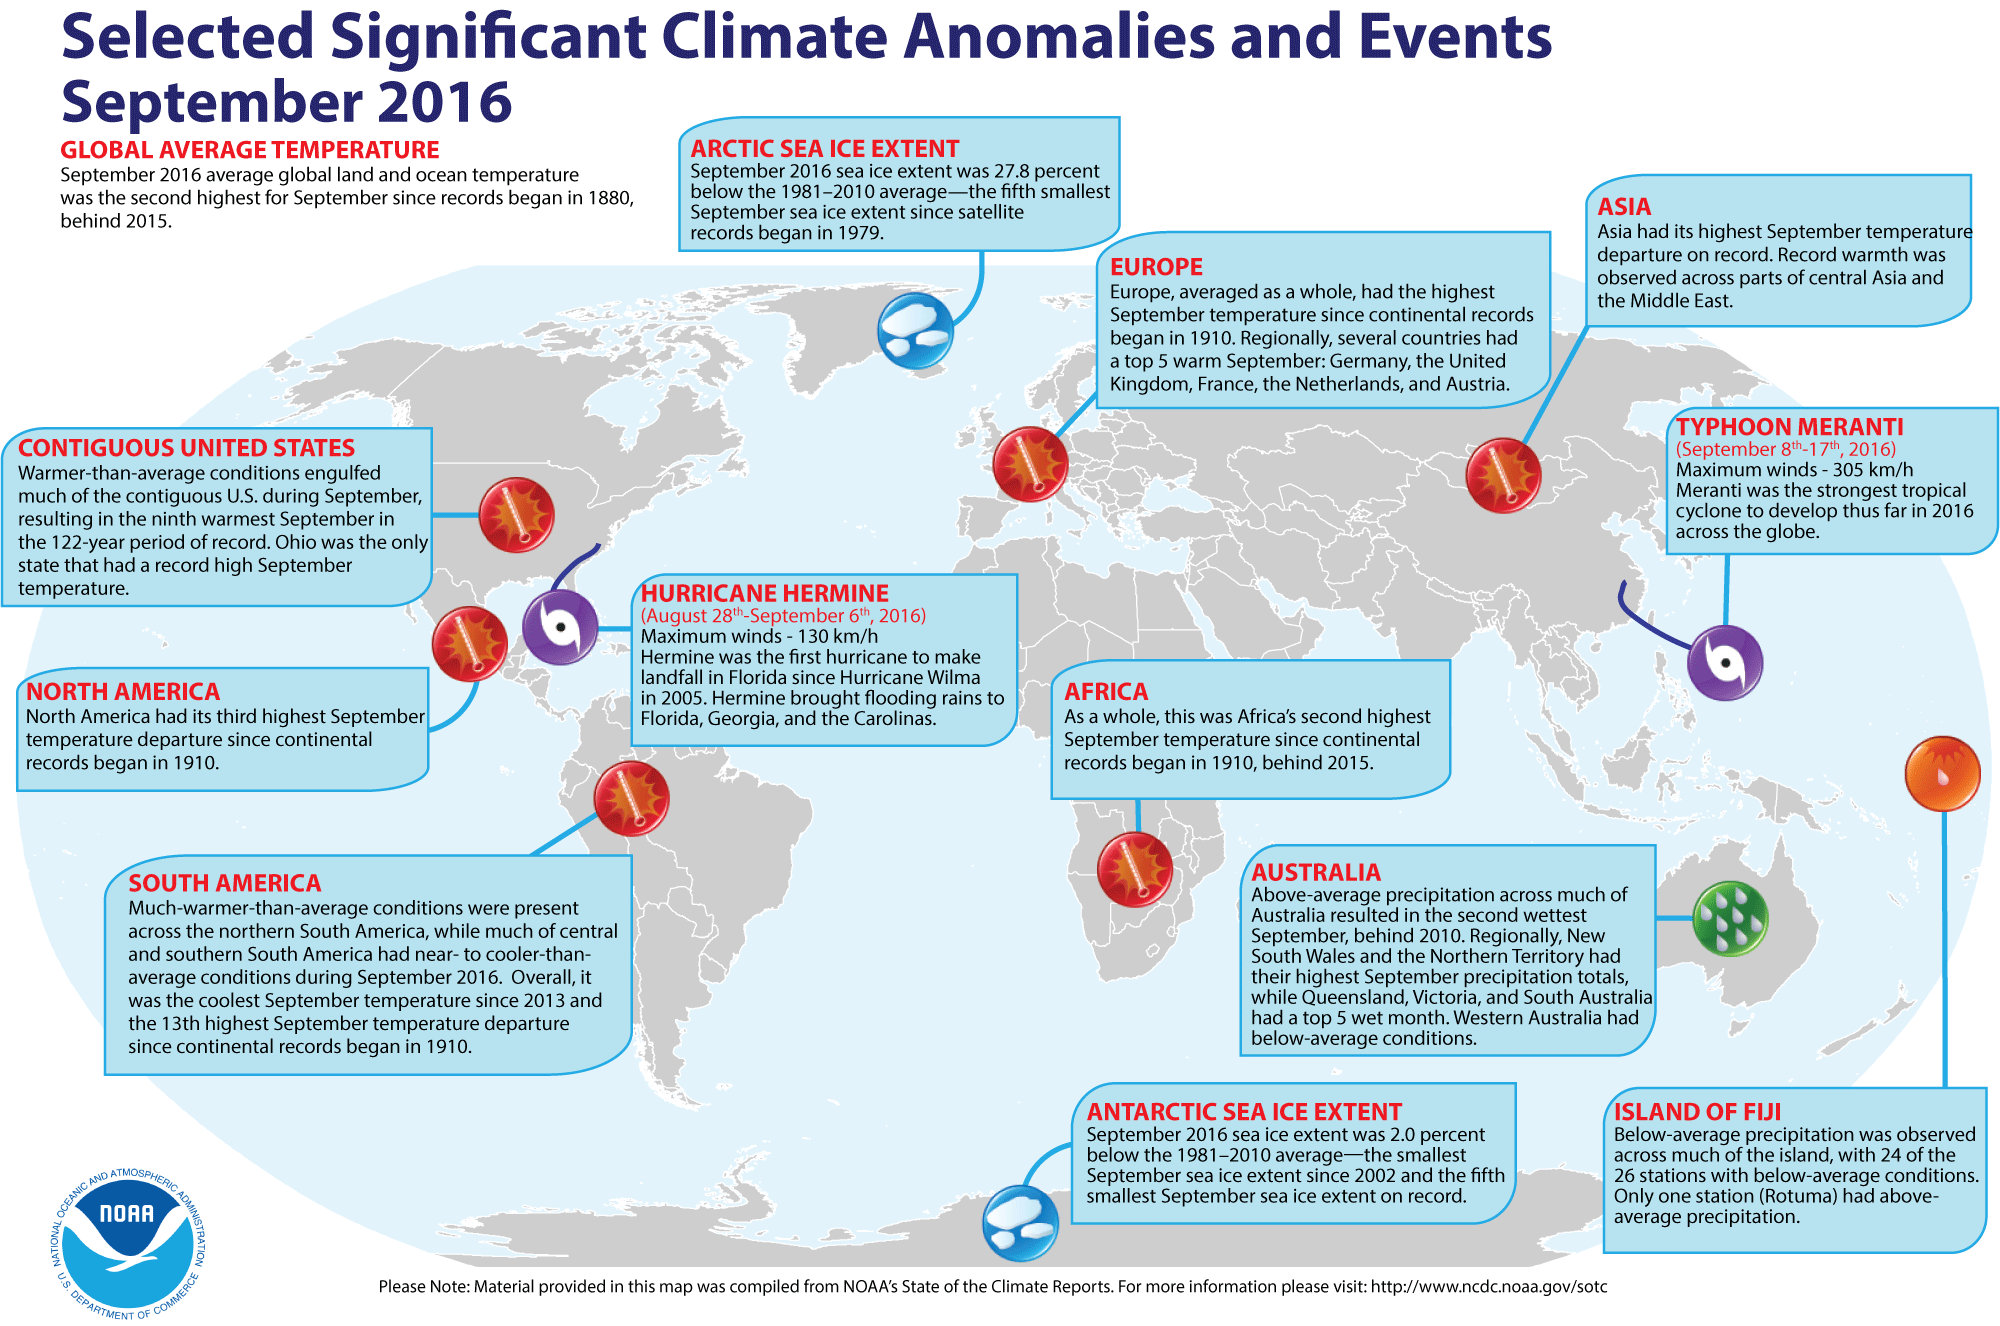 Here are some significant climate events that happened around the world in September 2016.